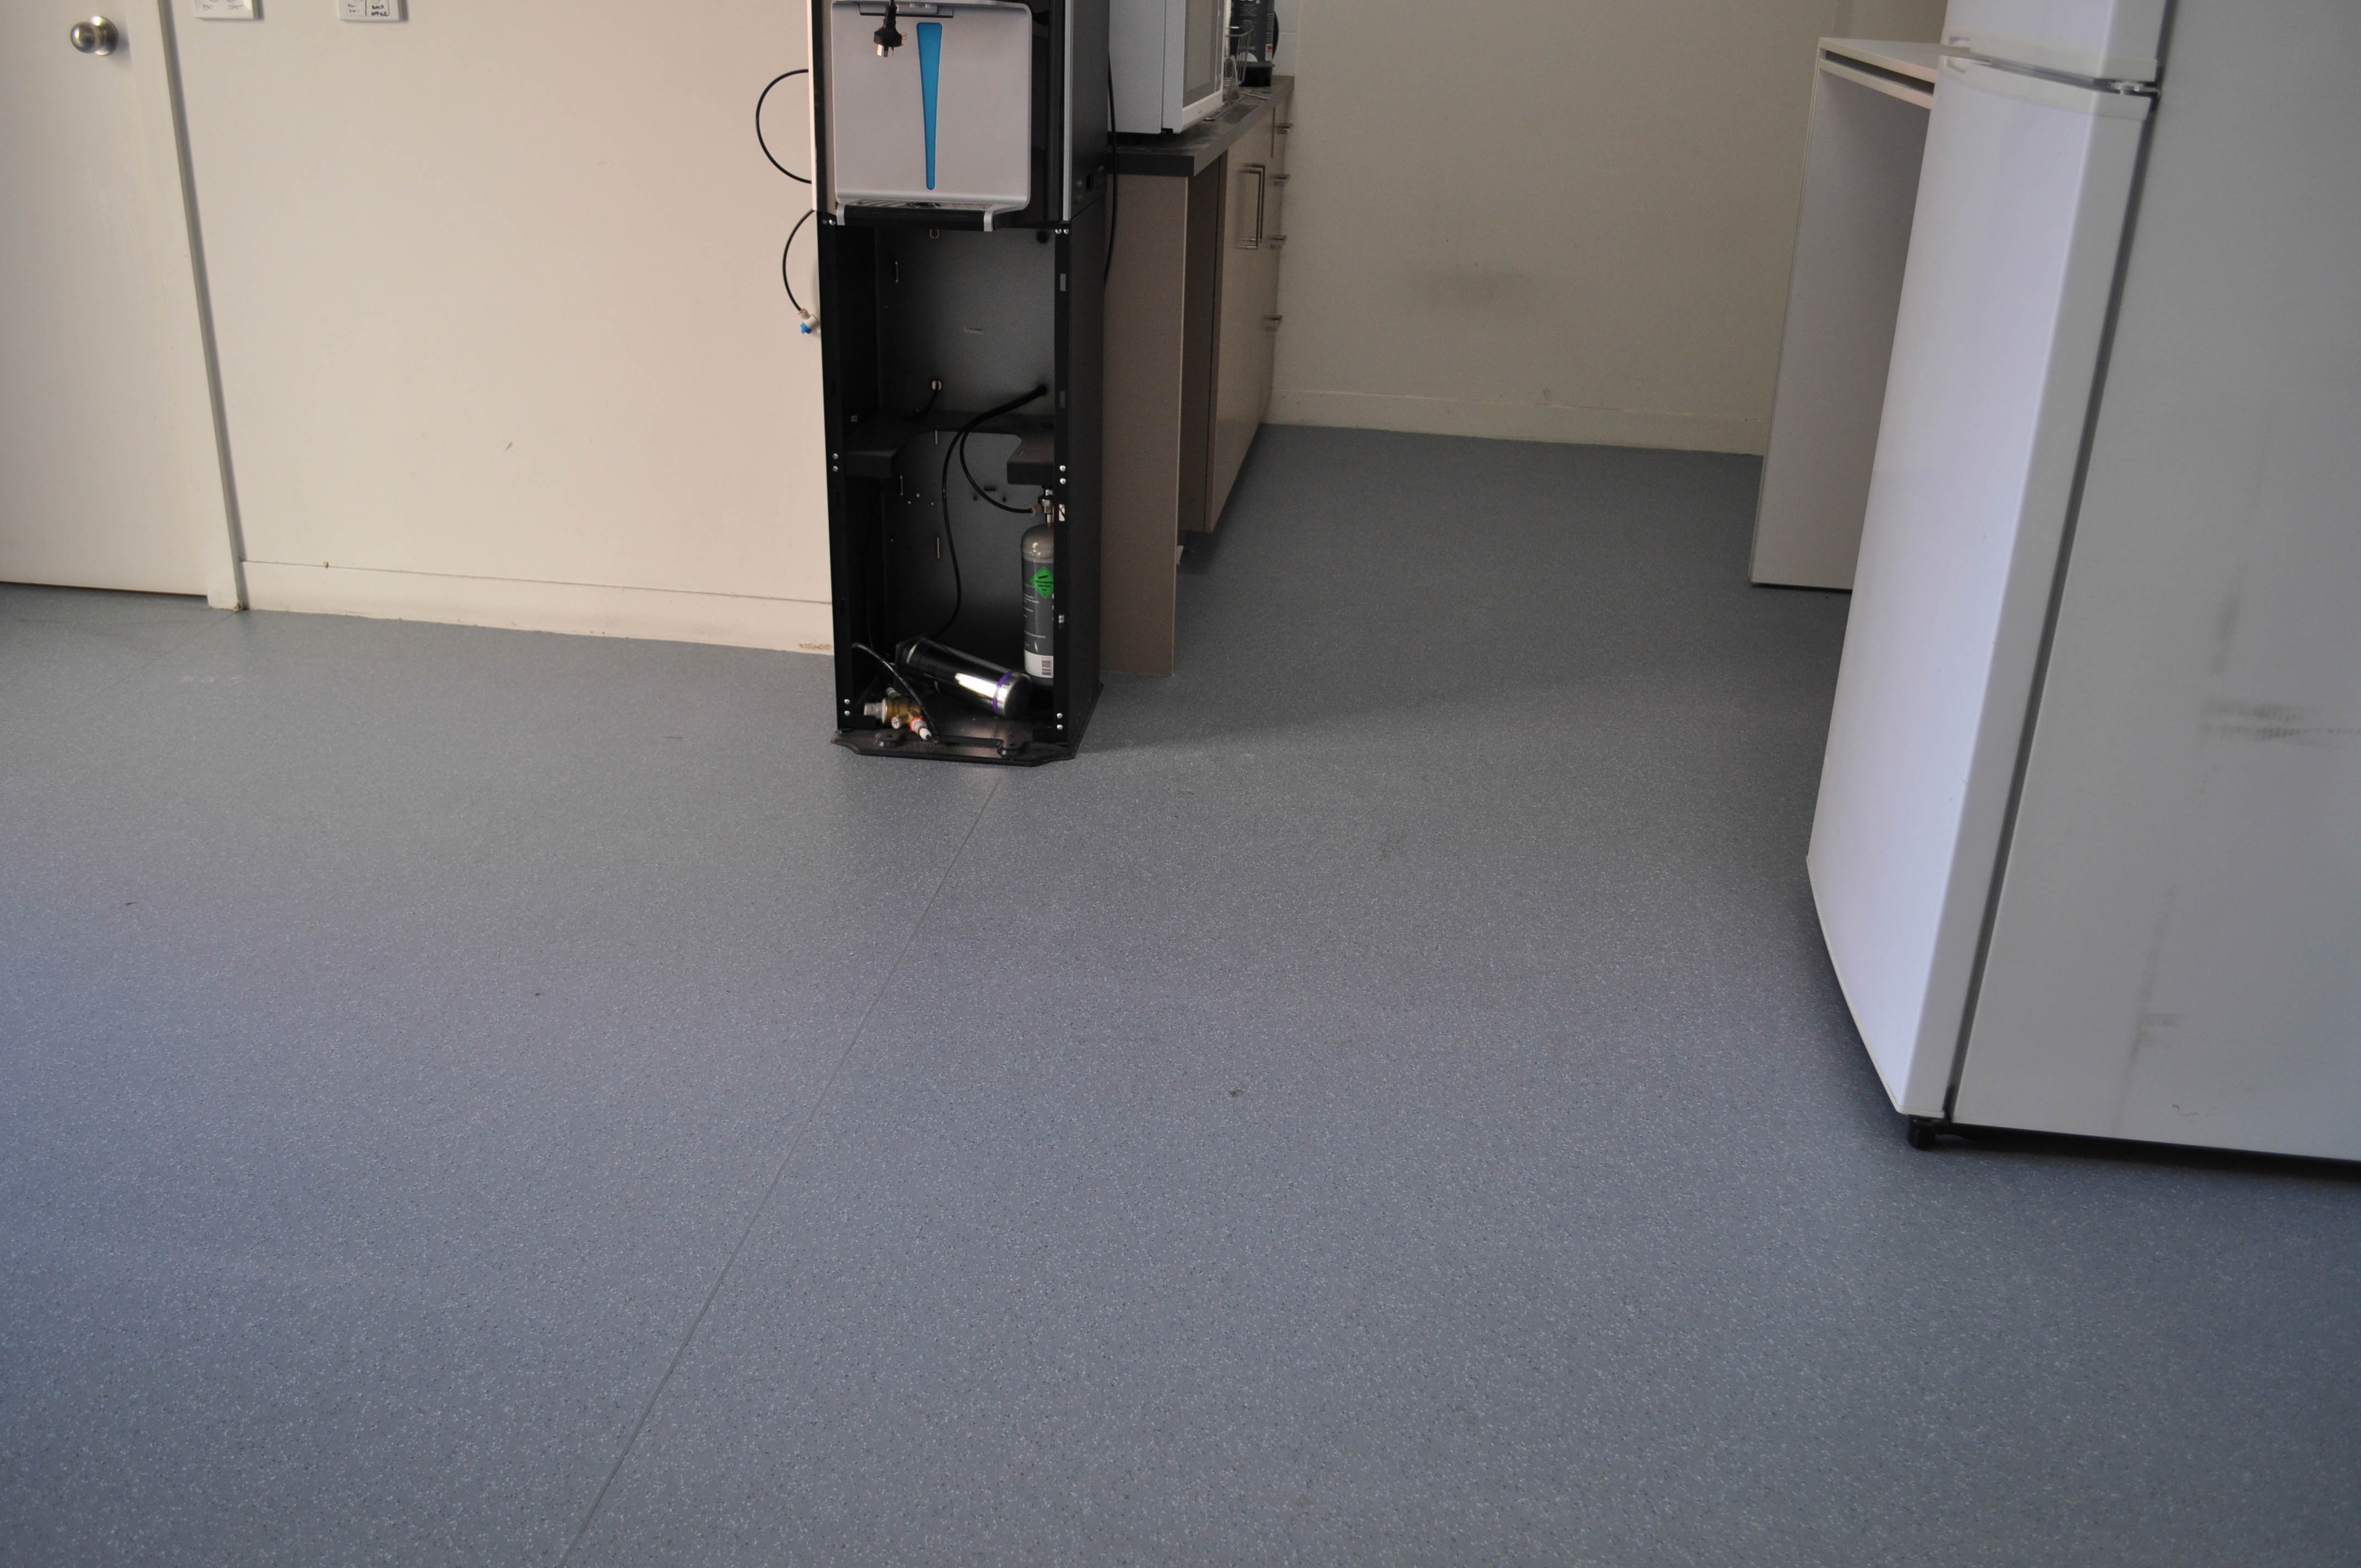 showing a kitchen with newly laid light blue commercial vinyl flooring. This vinyl flooring was installed by Concord Floors 
	in a real estate agency in Coburg.